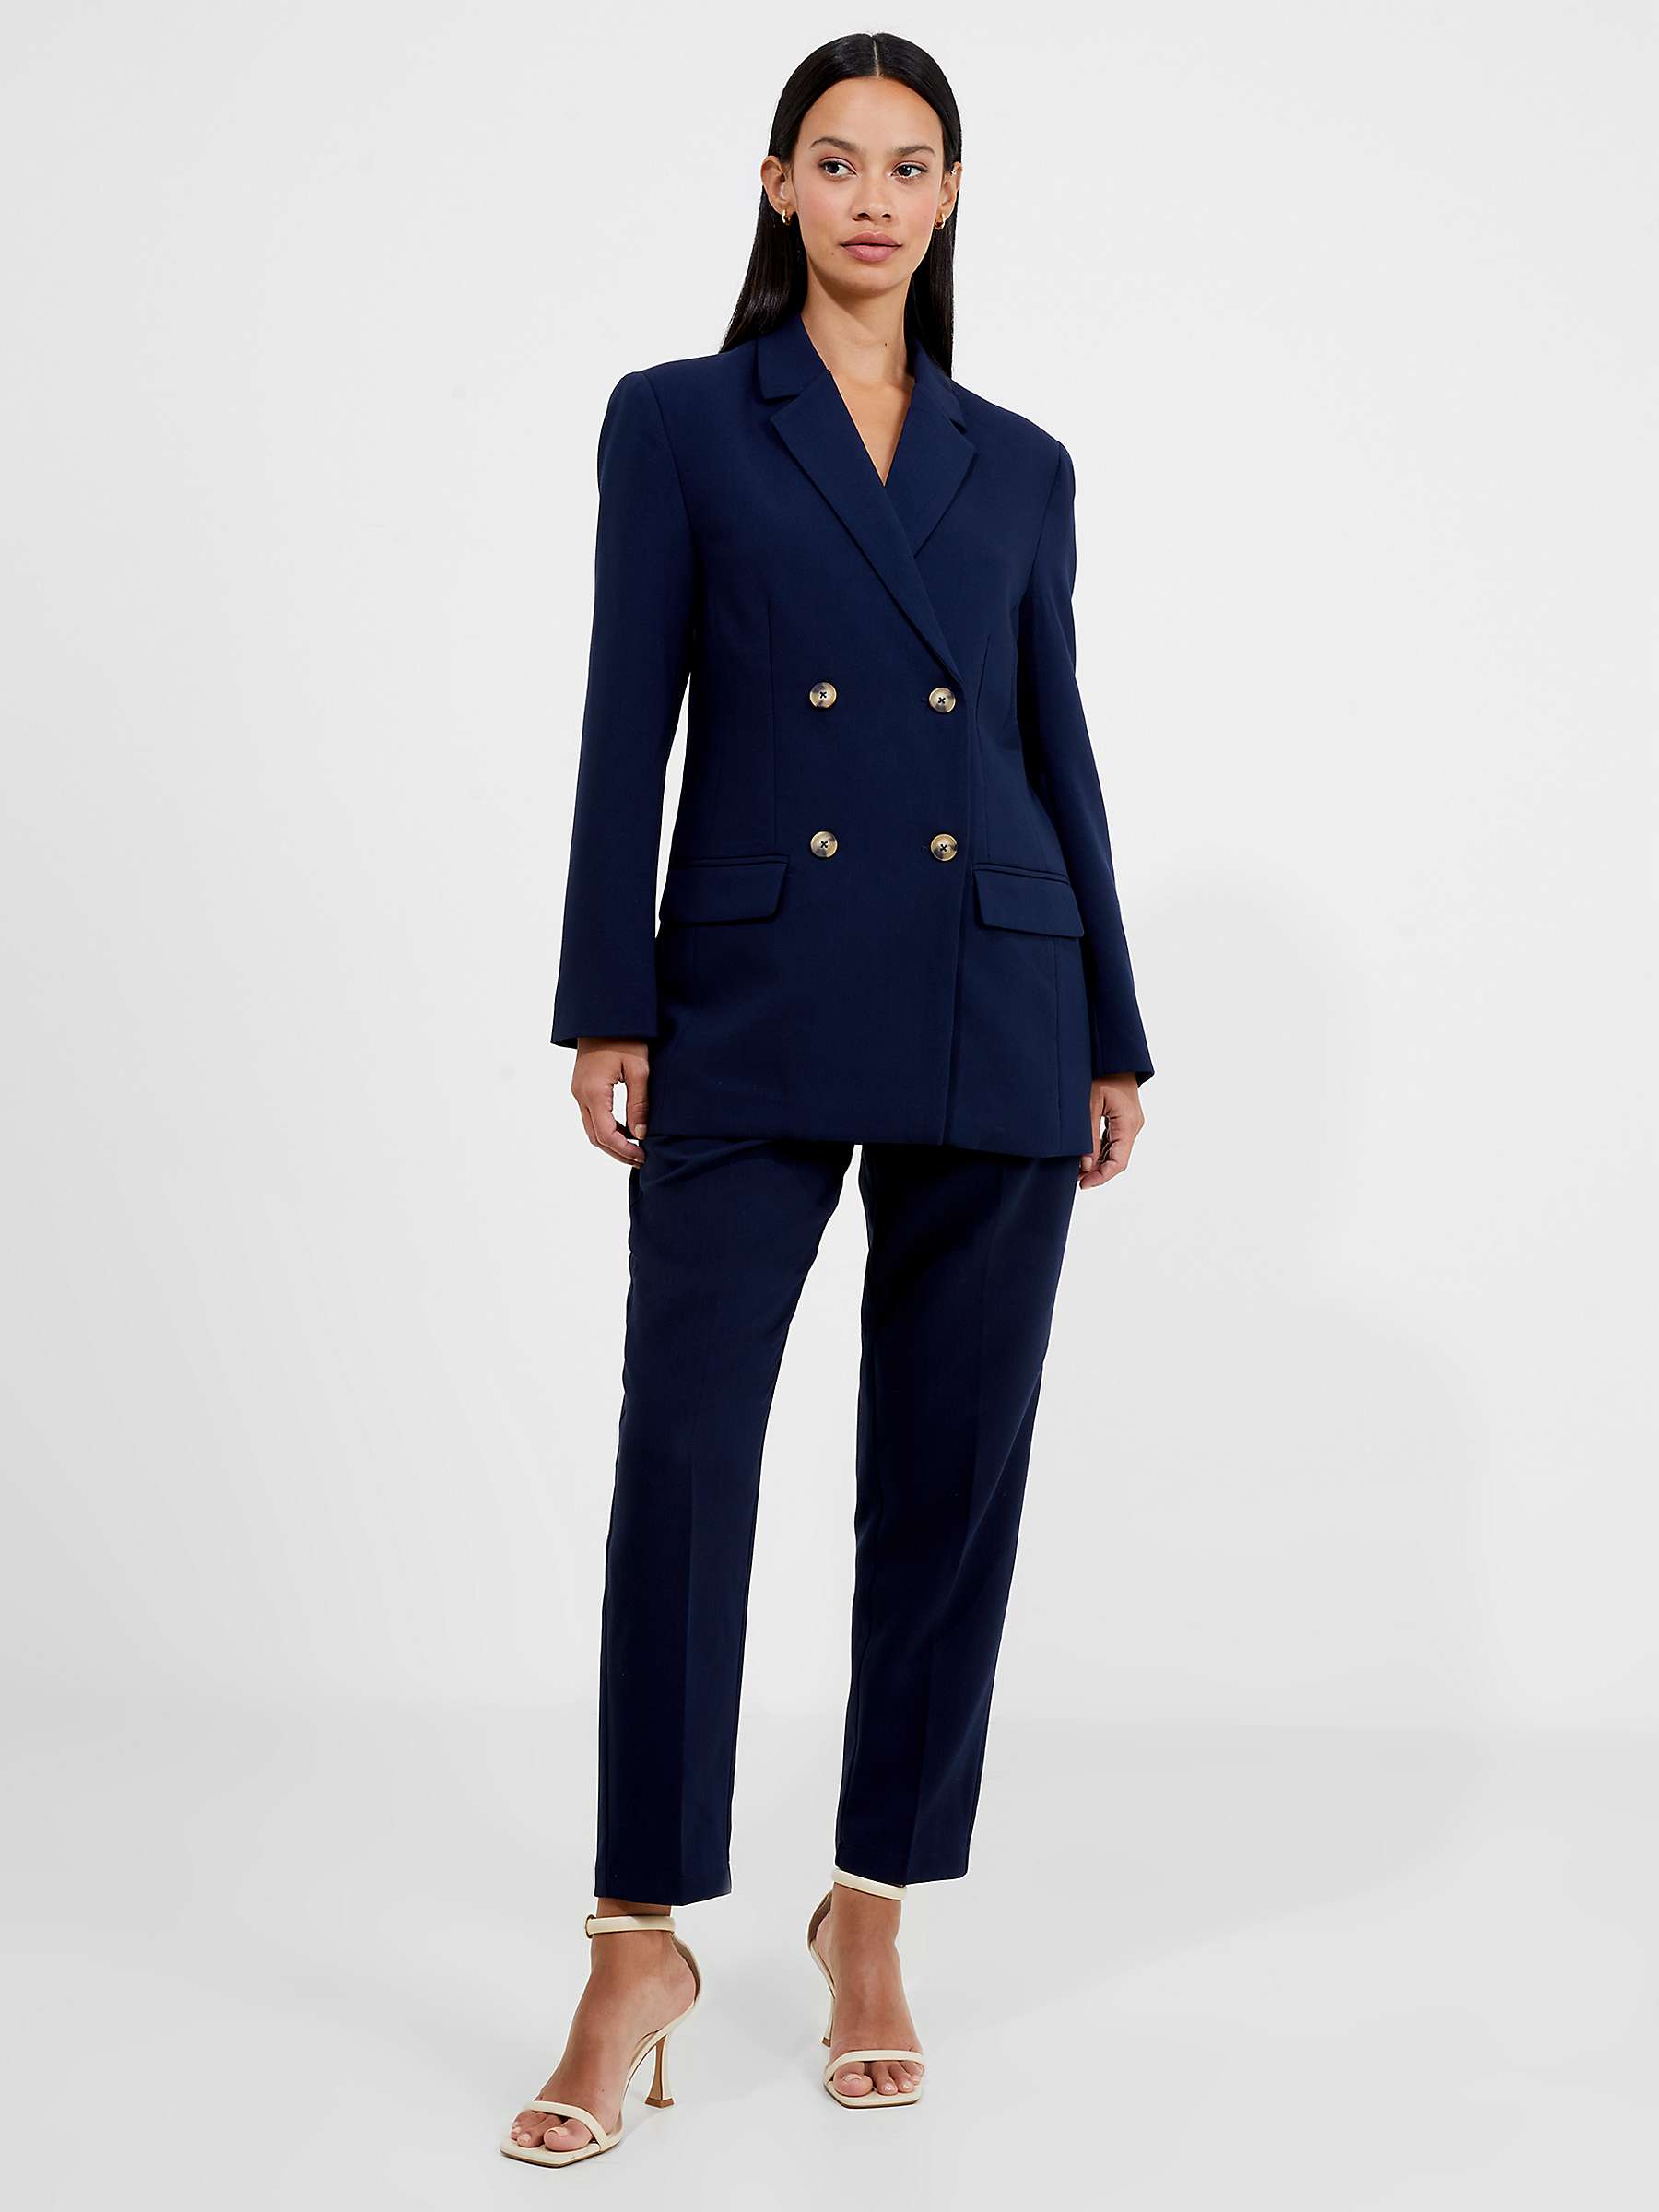 Buy French Connection Double Breasted Blazer Online at johnlewis.com